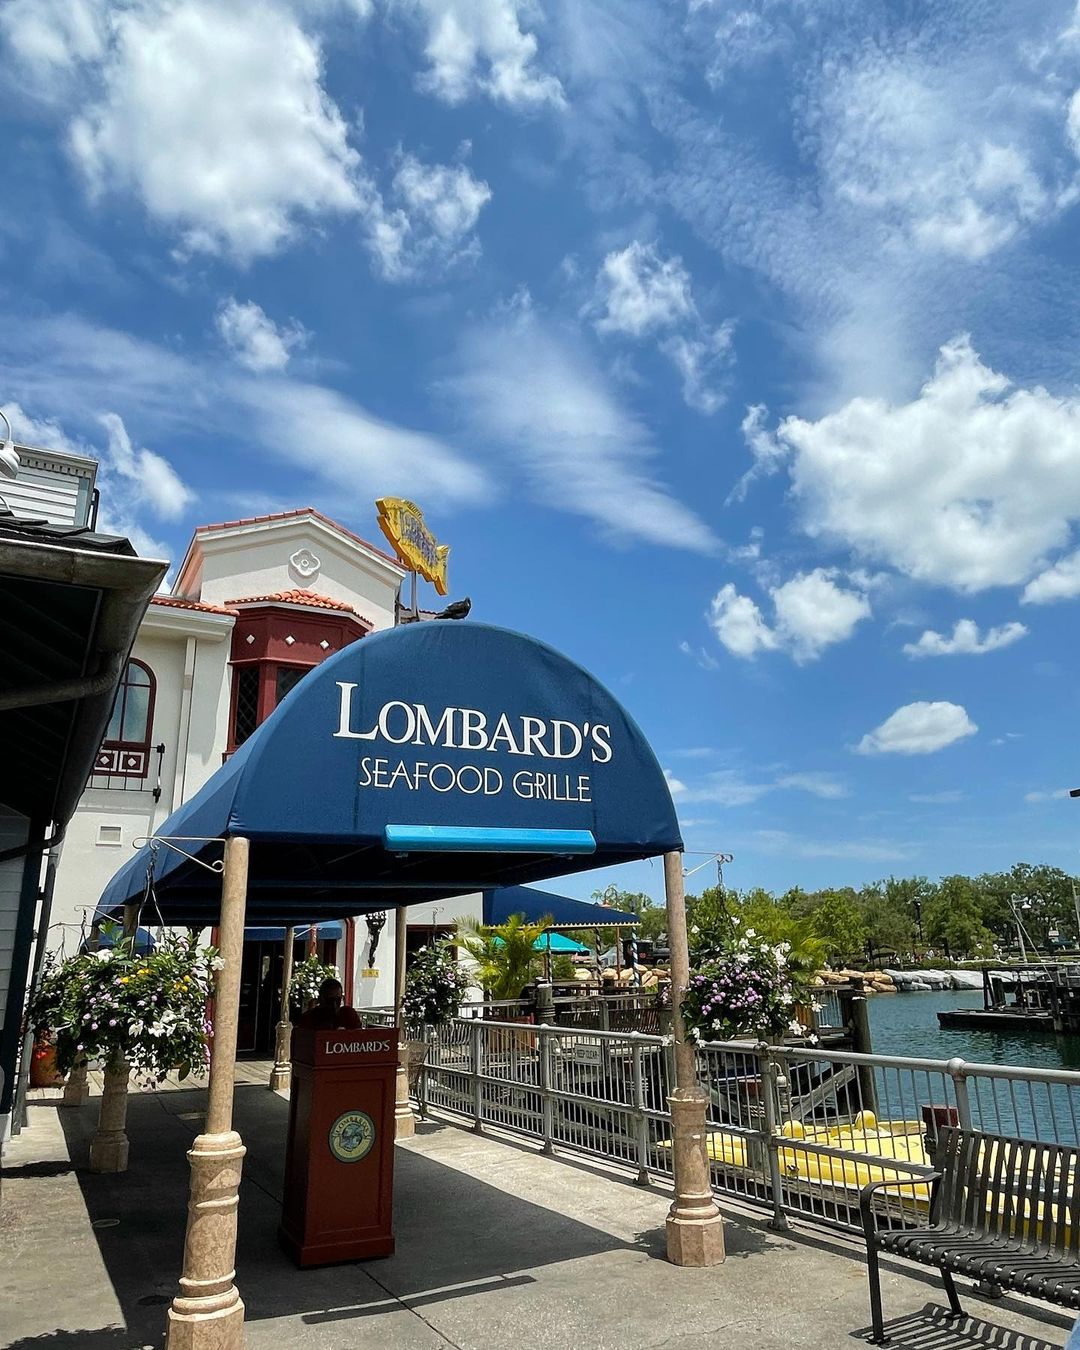 Fachada do Lombard's Seafood Grille